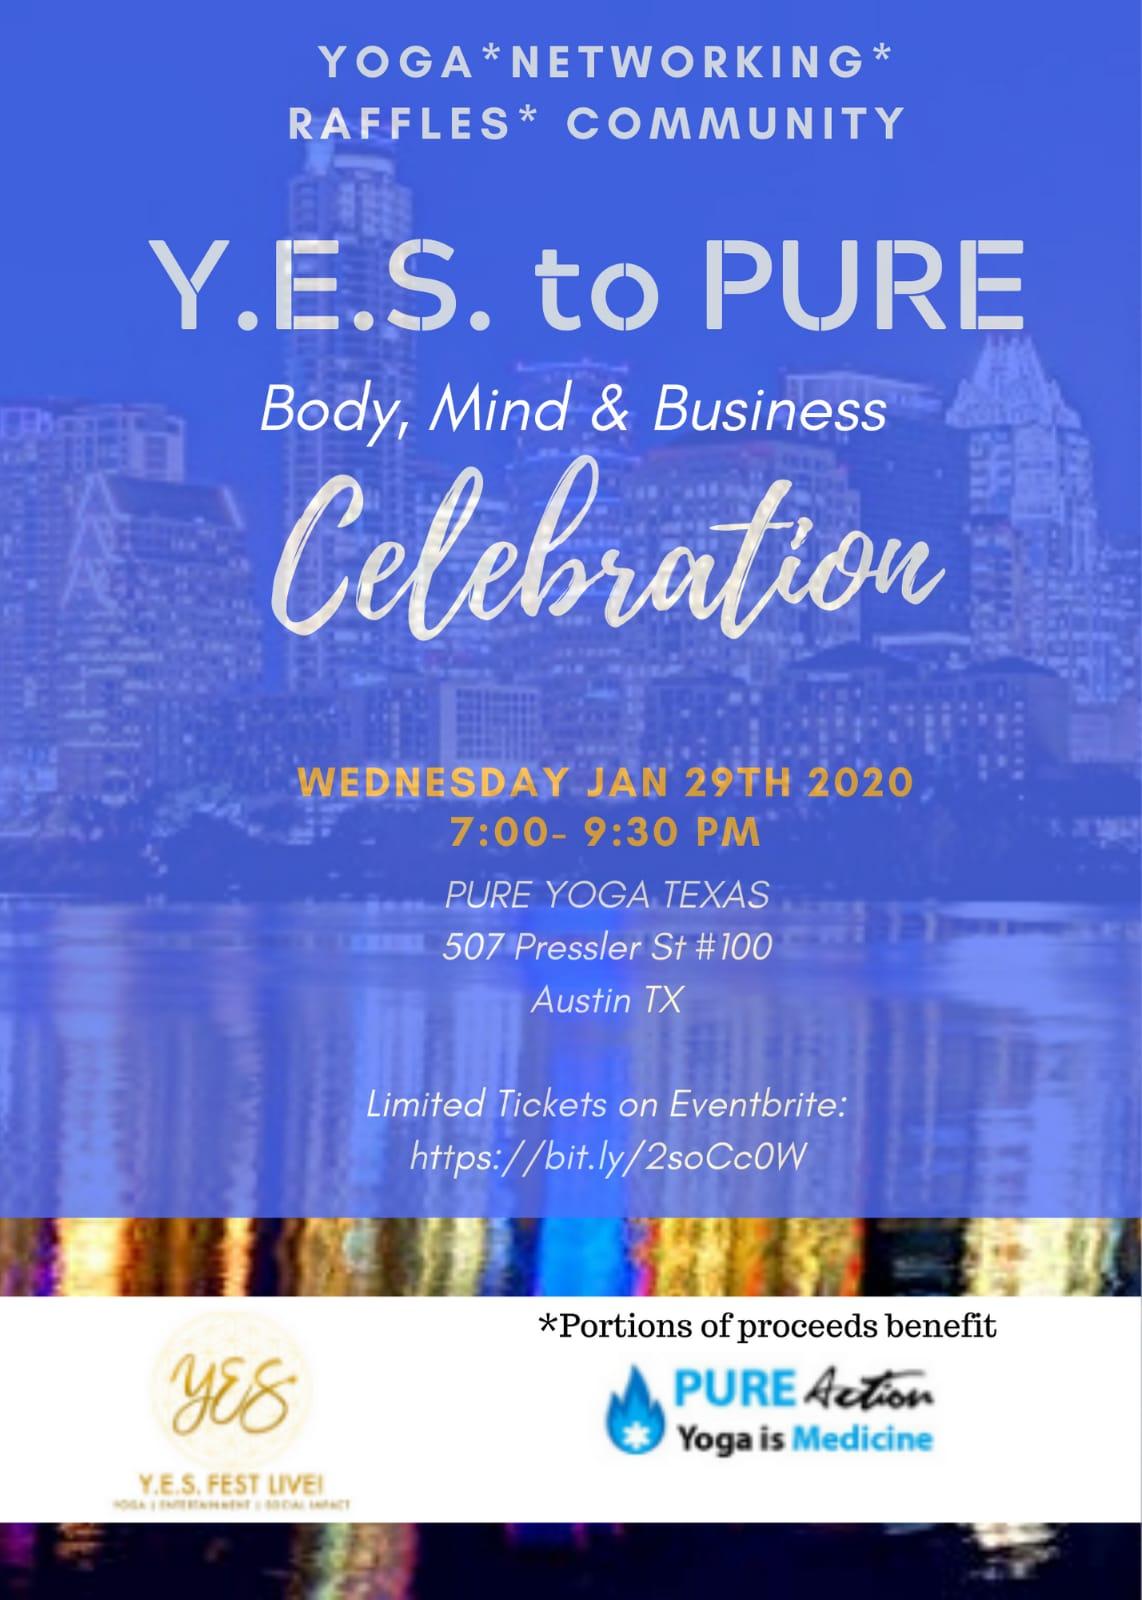 Y.E.S. to PURE ACTION CELEBRATION Yoga | Networking| Community Fun, YES!